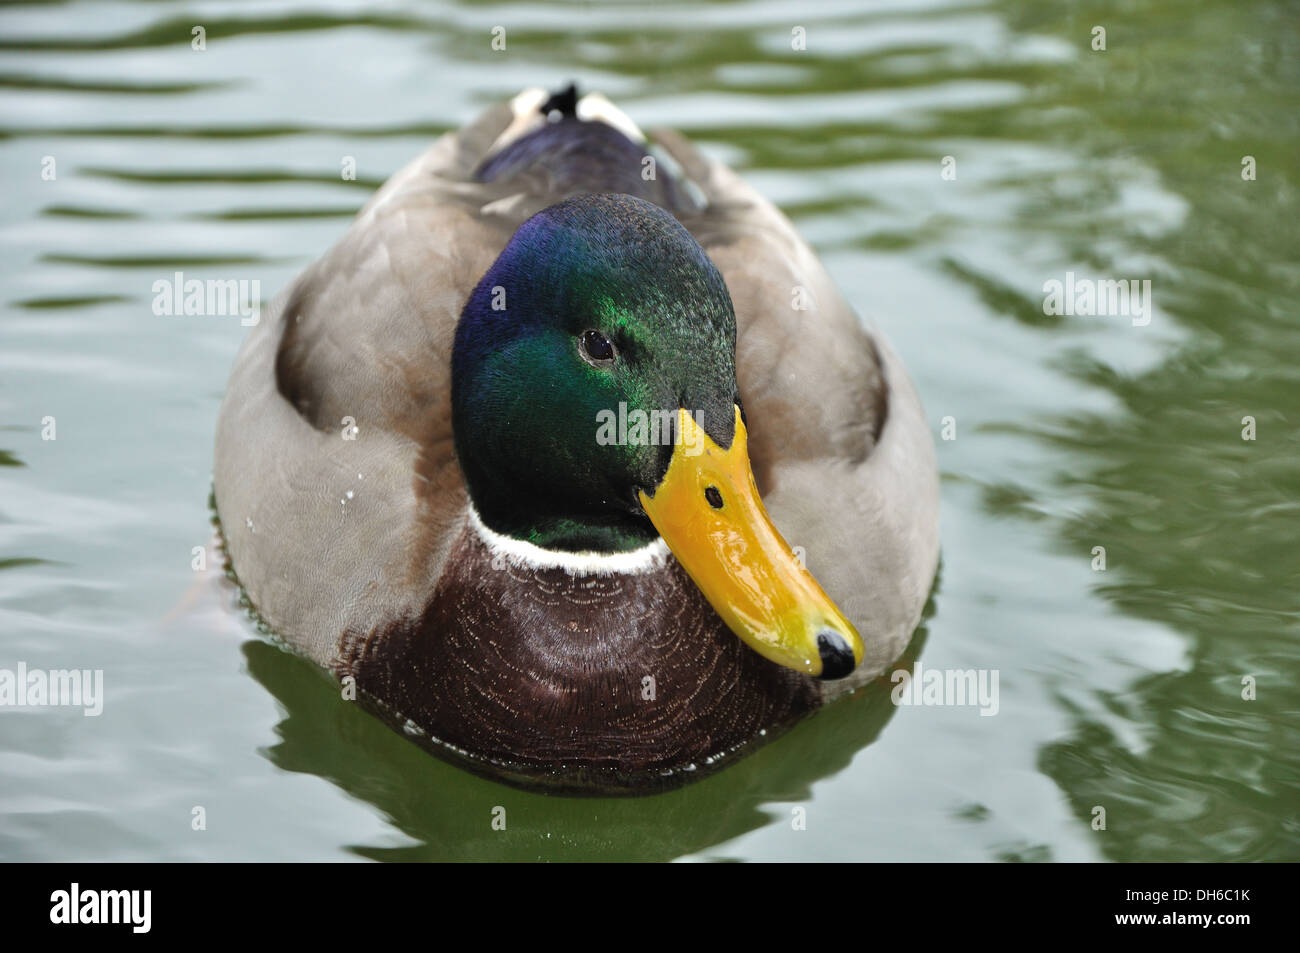 he-duck swimming on the water Stock Photo